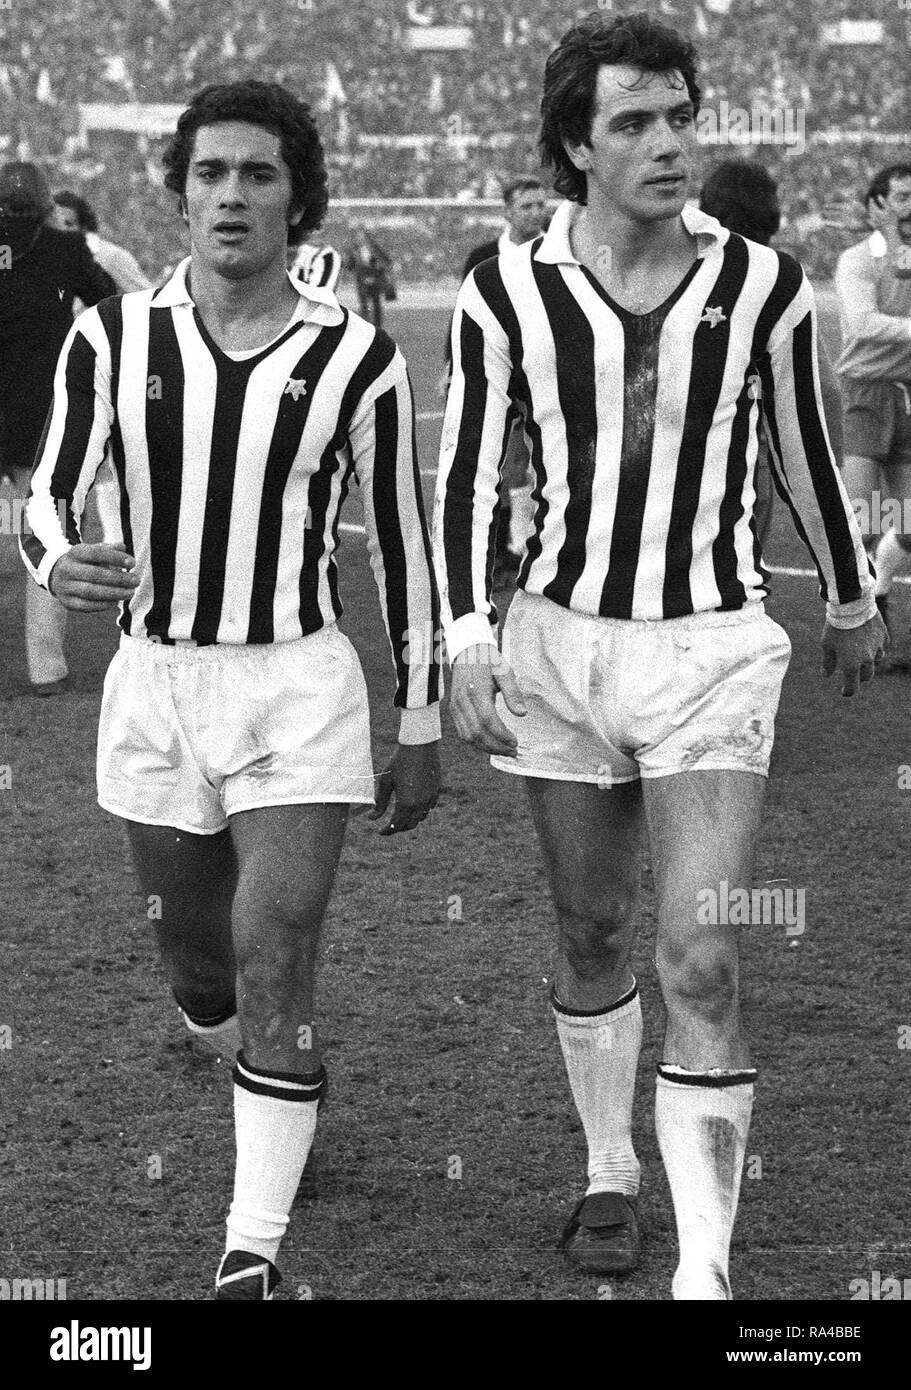 Rome, Olympic Stadium, January 5, 1975. From left: Juventus players, Claudio Gentile and Roberto Bettega, come out of the field at the end of the lost away match at Lazio (0-1) and valid for the 12th day of the Italian championship of Serie A 1974-75. Stock Photo